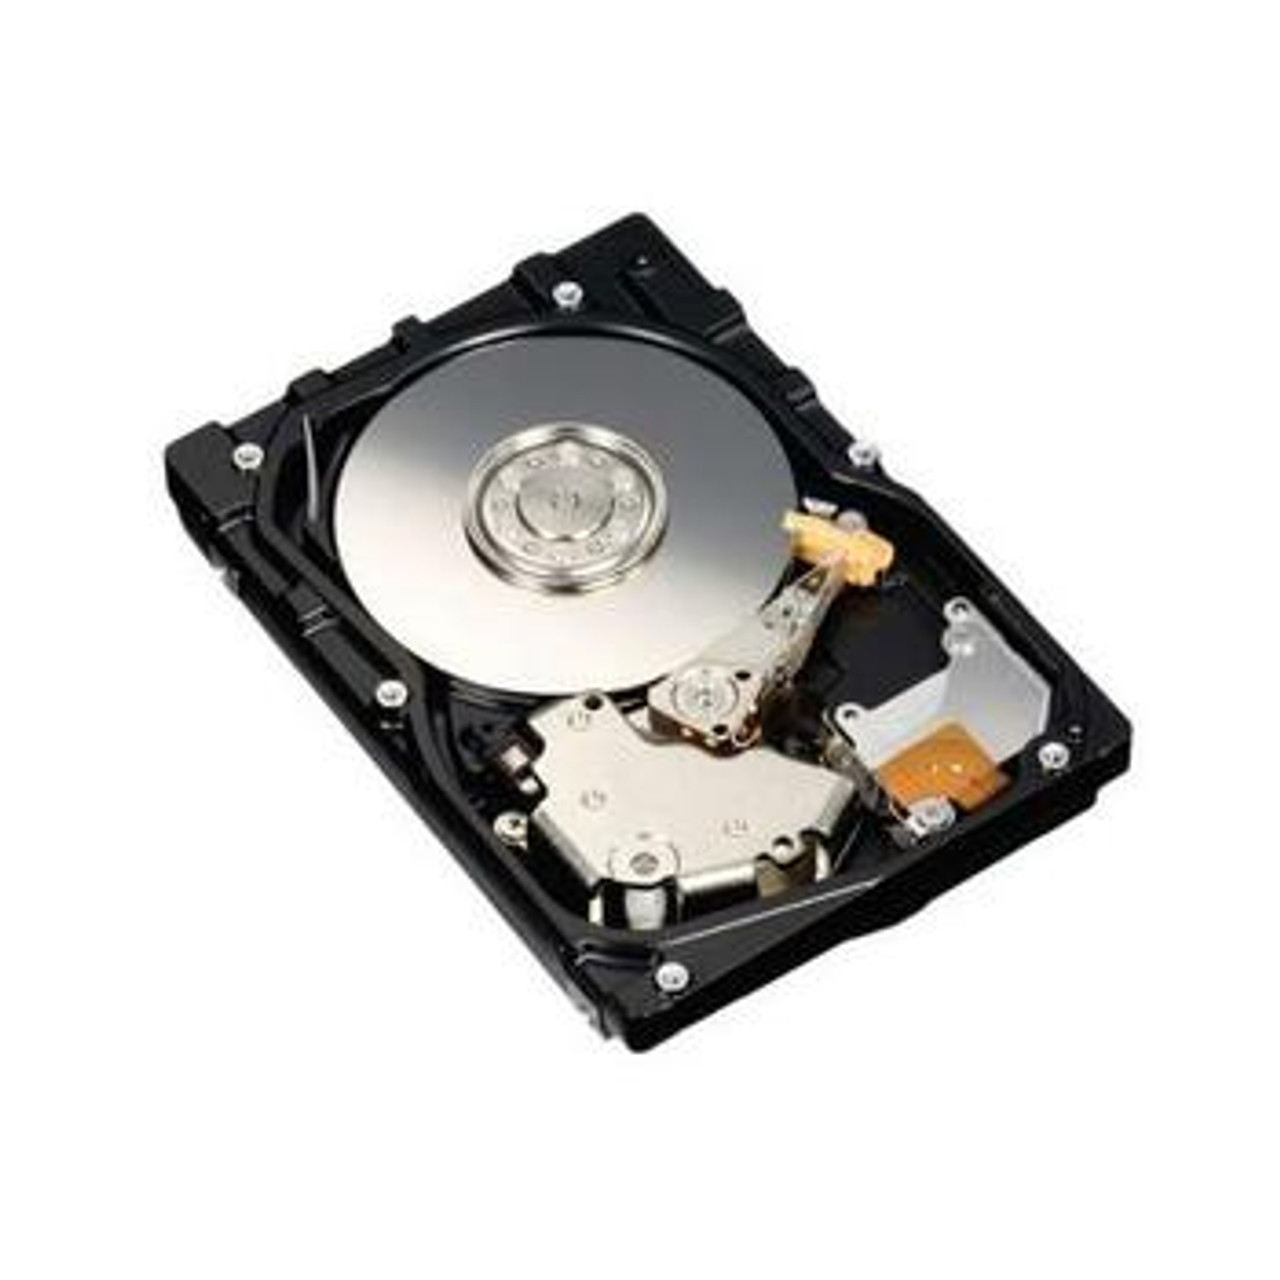 0HT952 Dell 73GB 10000RPM SAS 3.0 Gbps 2.5 16MB Cache Hard Drive